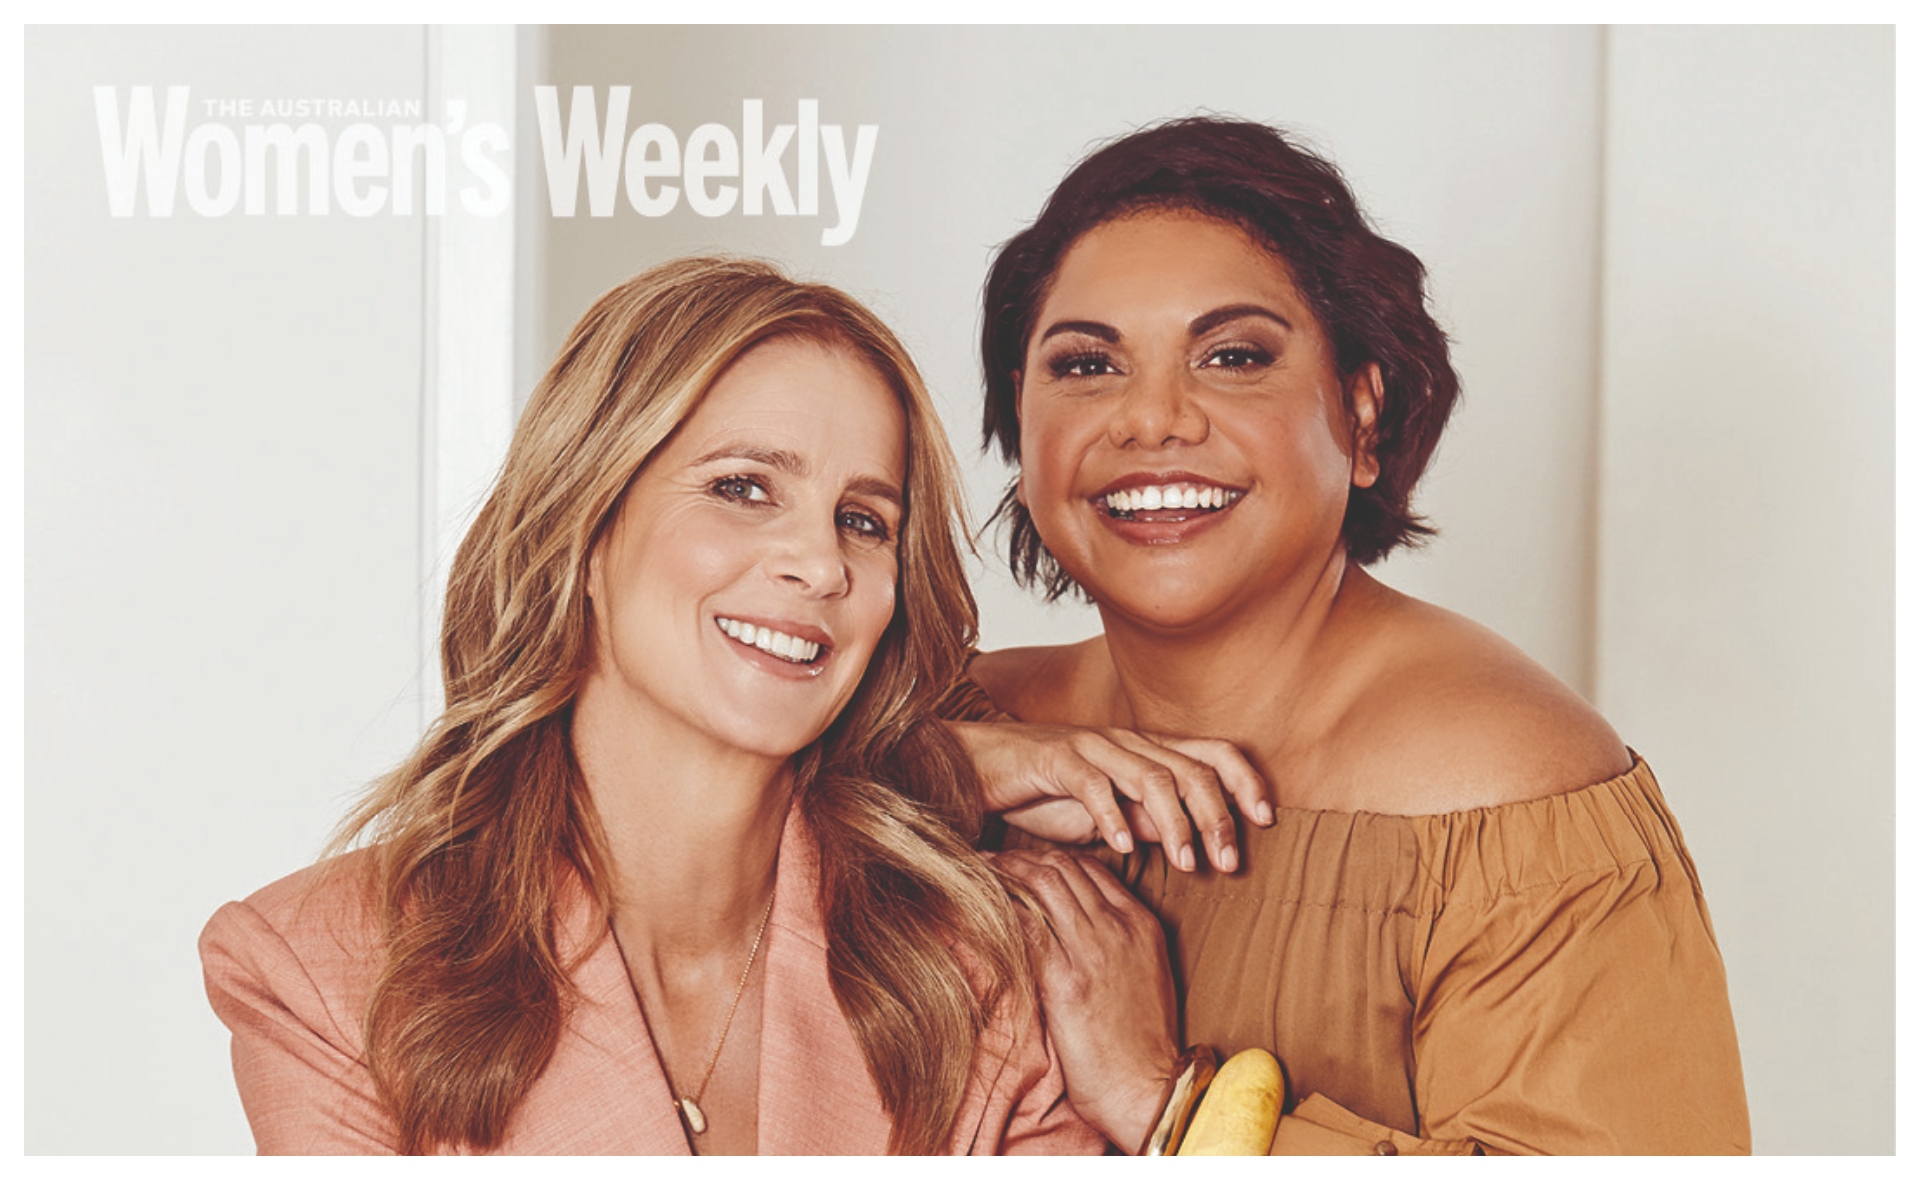 EXCLUSIVE: How Deborah Mailman and Rachel Griffiths’ beautiful friendship was built on just “getting” each other